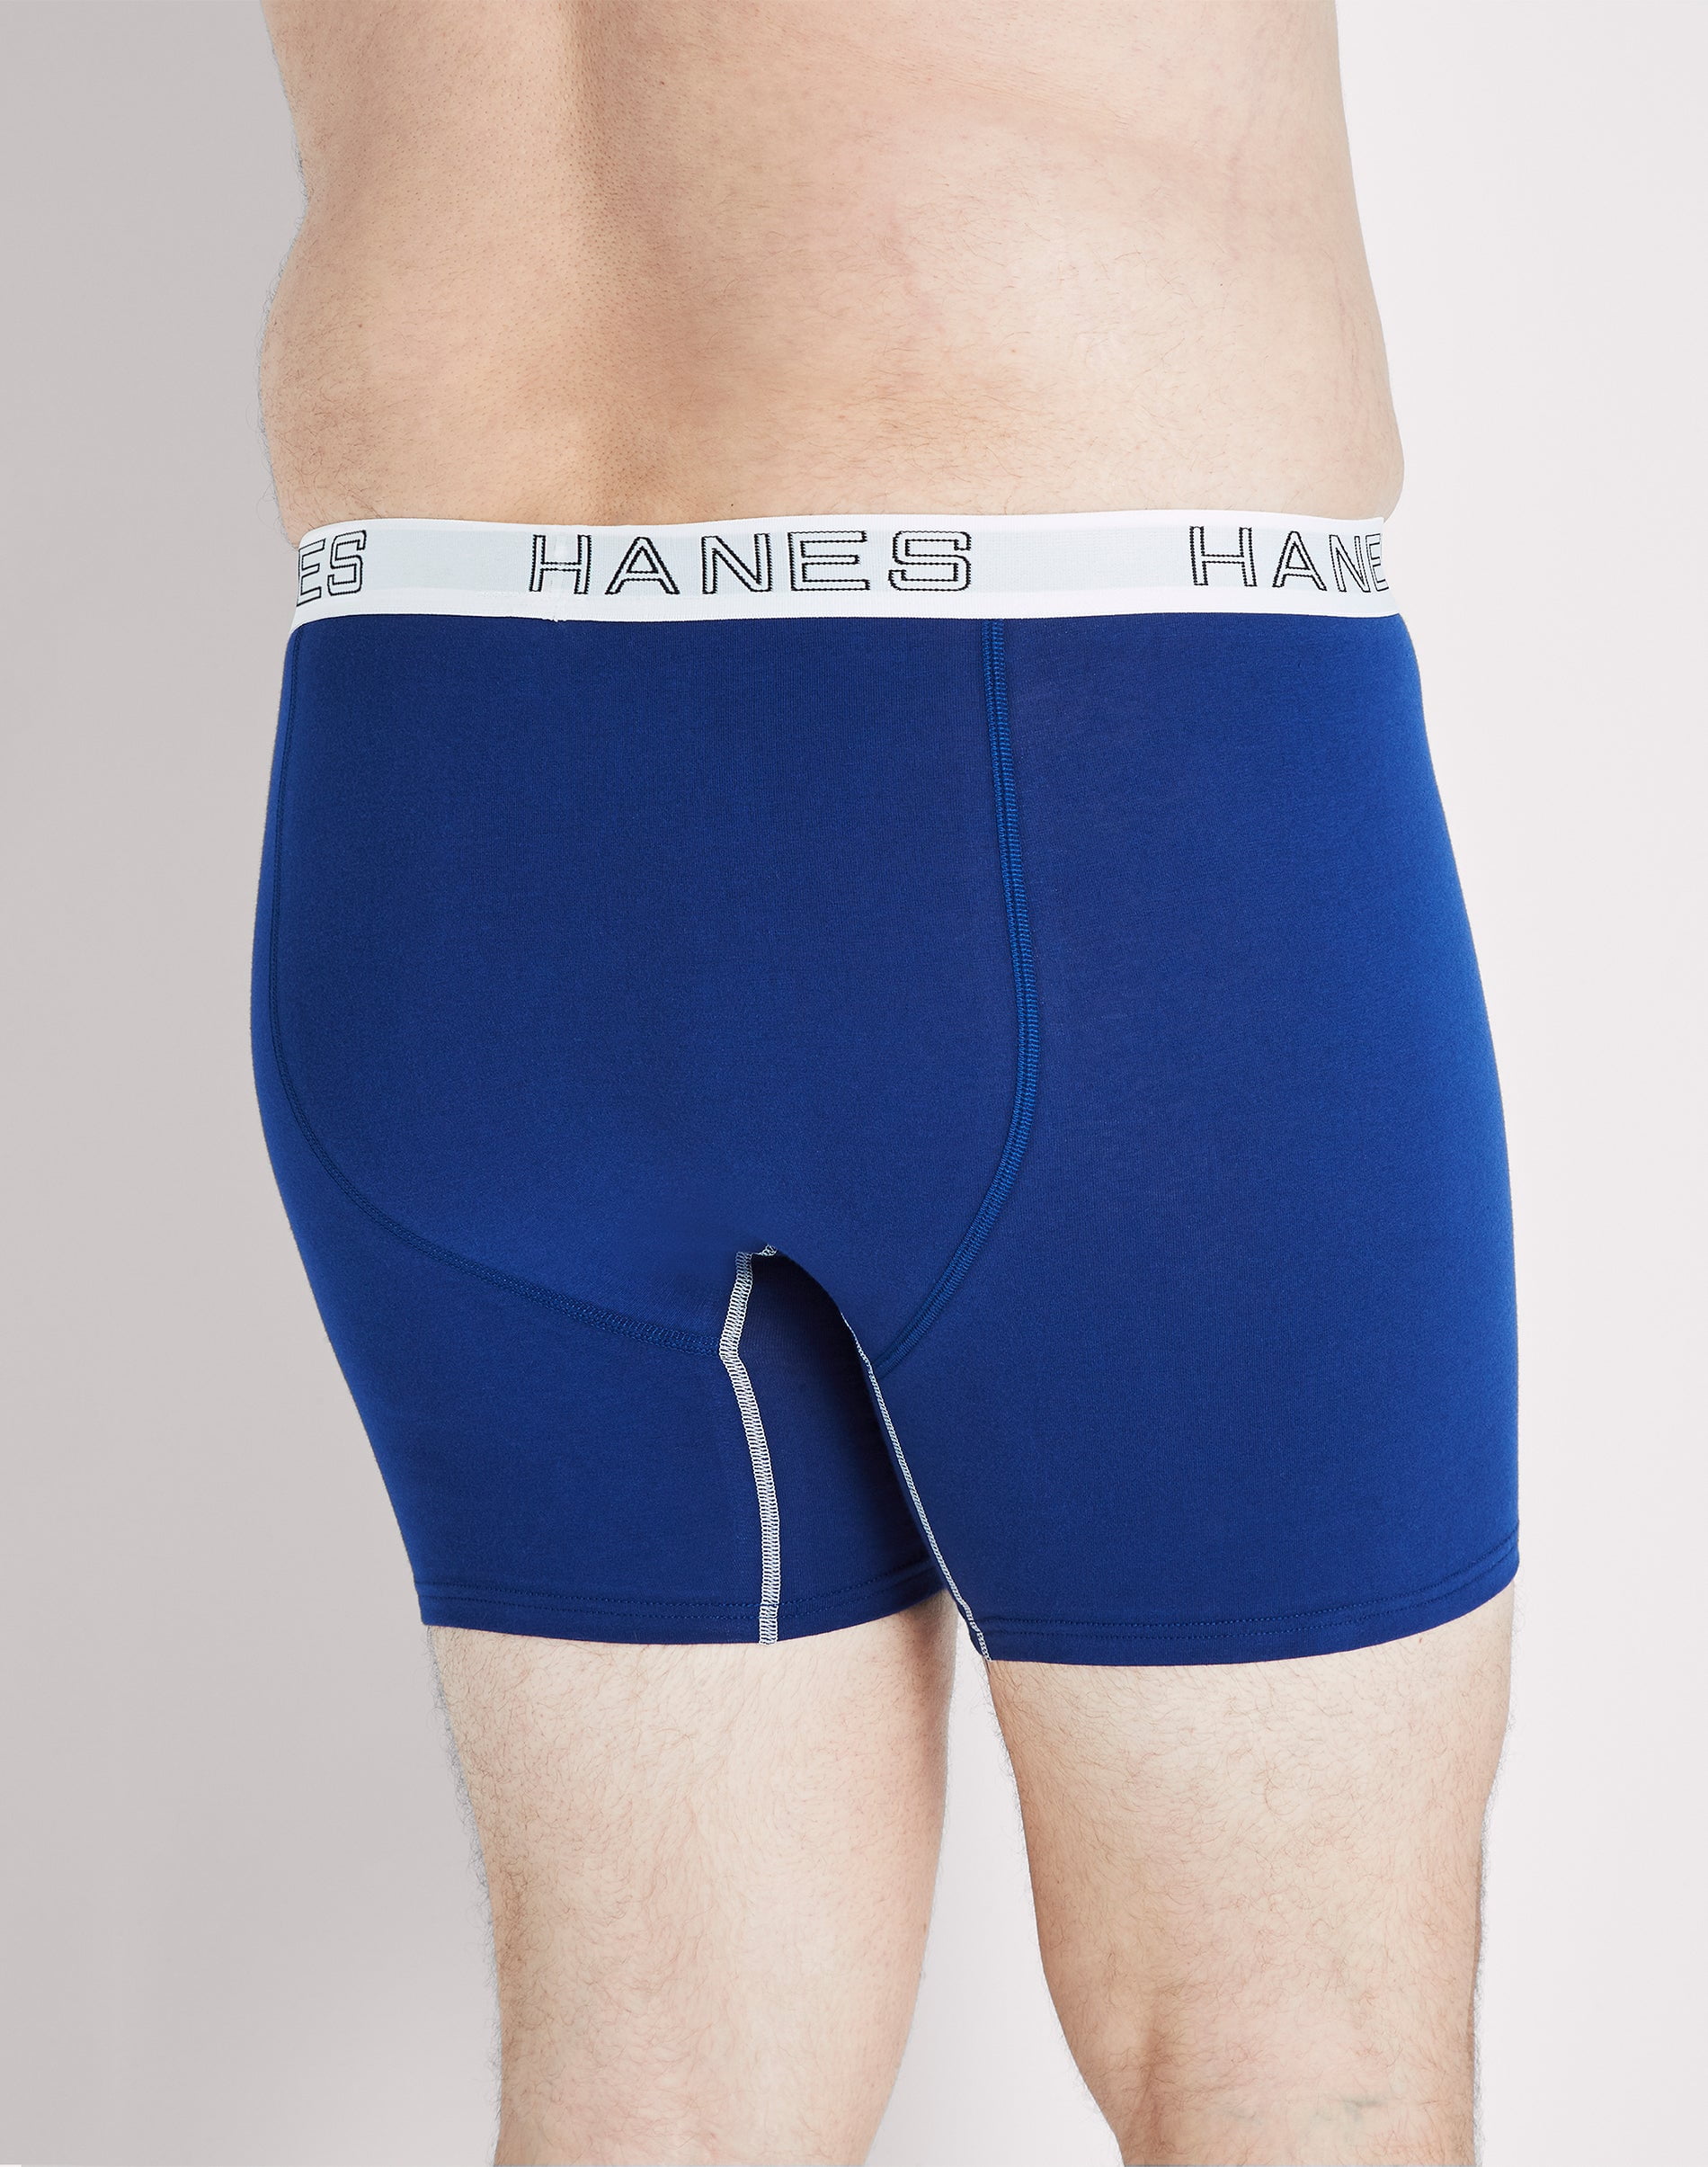 Hanes Ultimate Stretch Cotton Big Men's Boxer Brief Underwear, Assorted, 4-Pack  ( & Tall Sizes) 2XB 